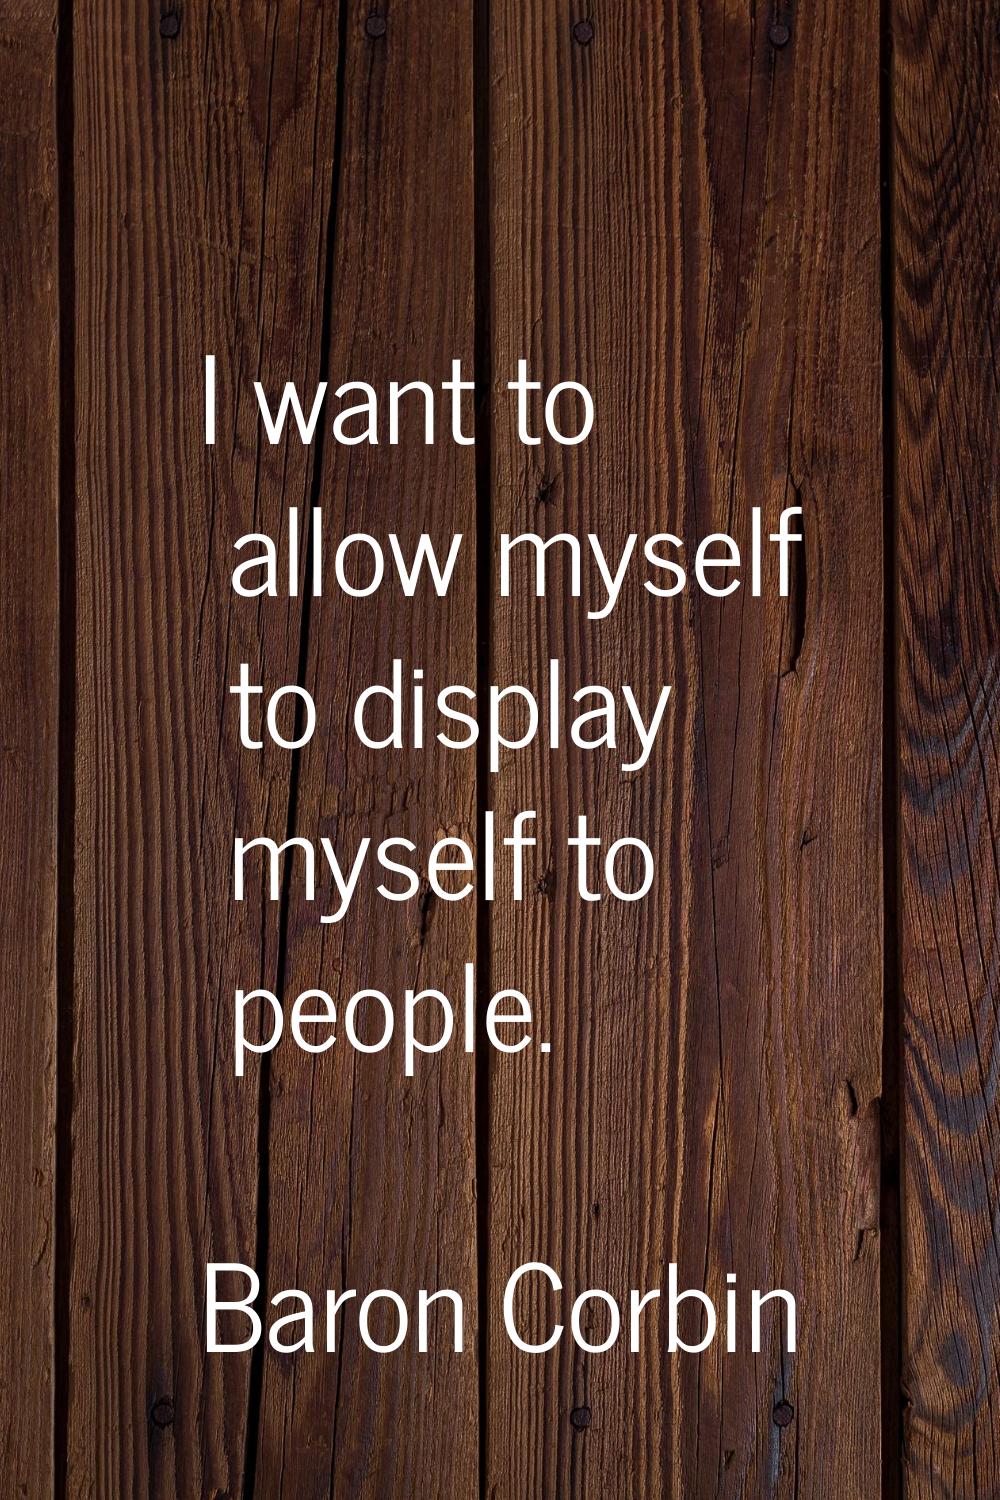 I want to allow myself to display myself to people.